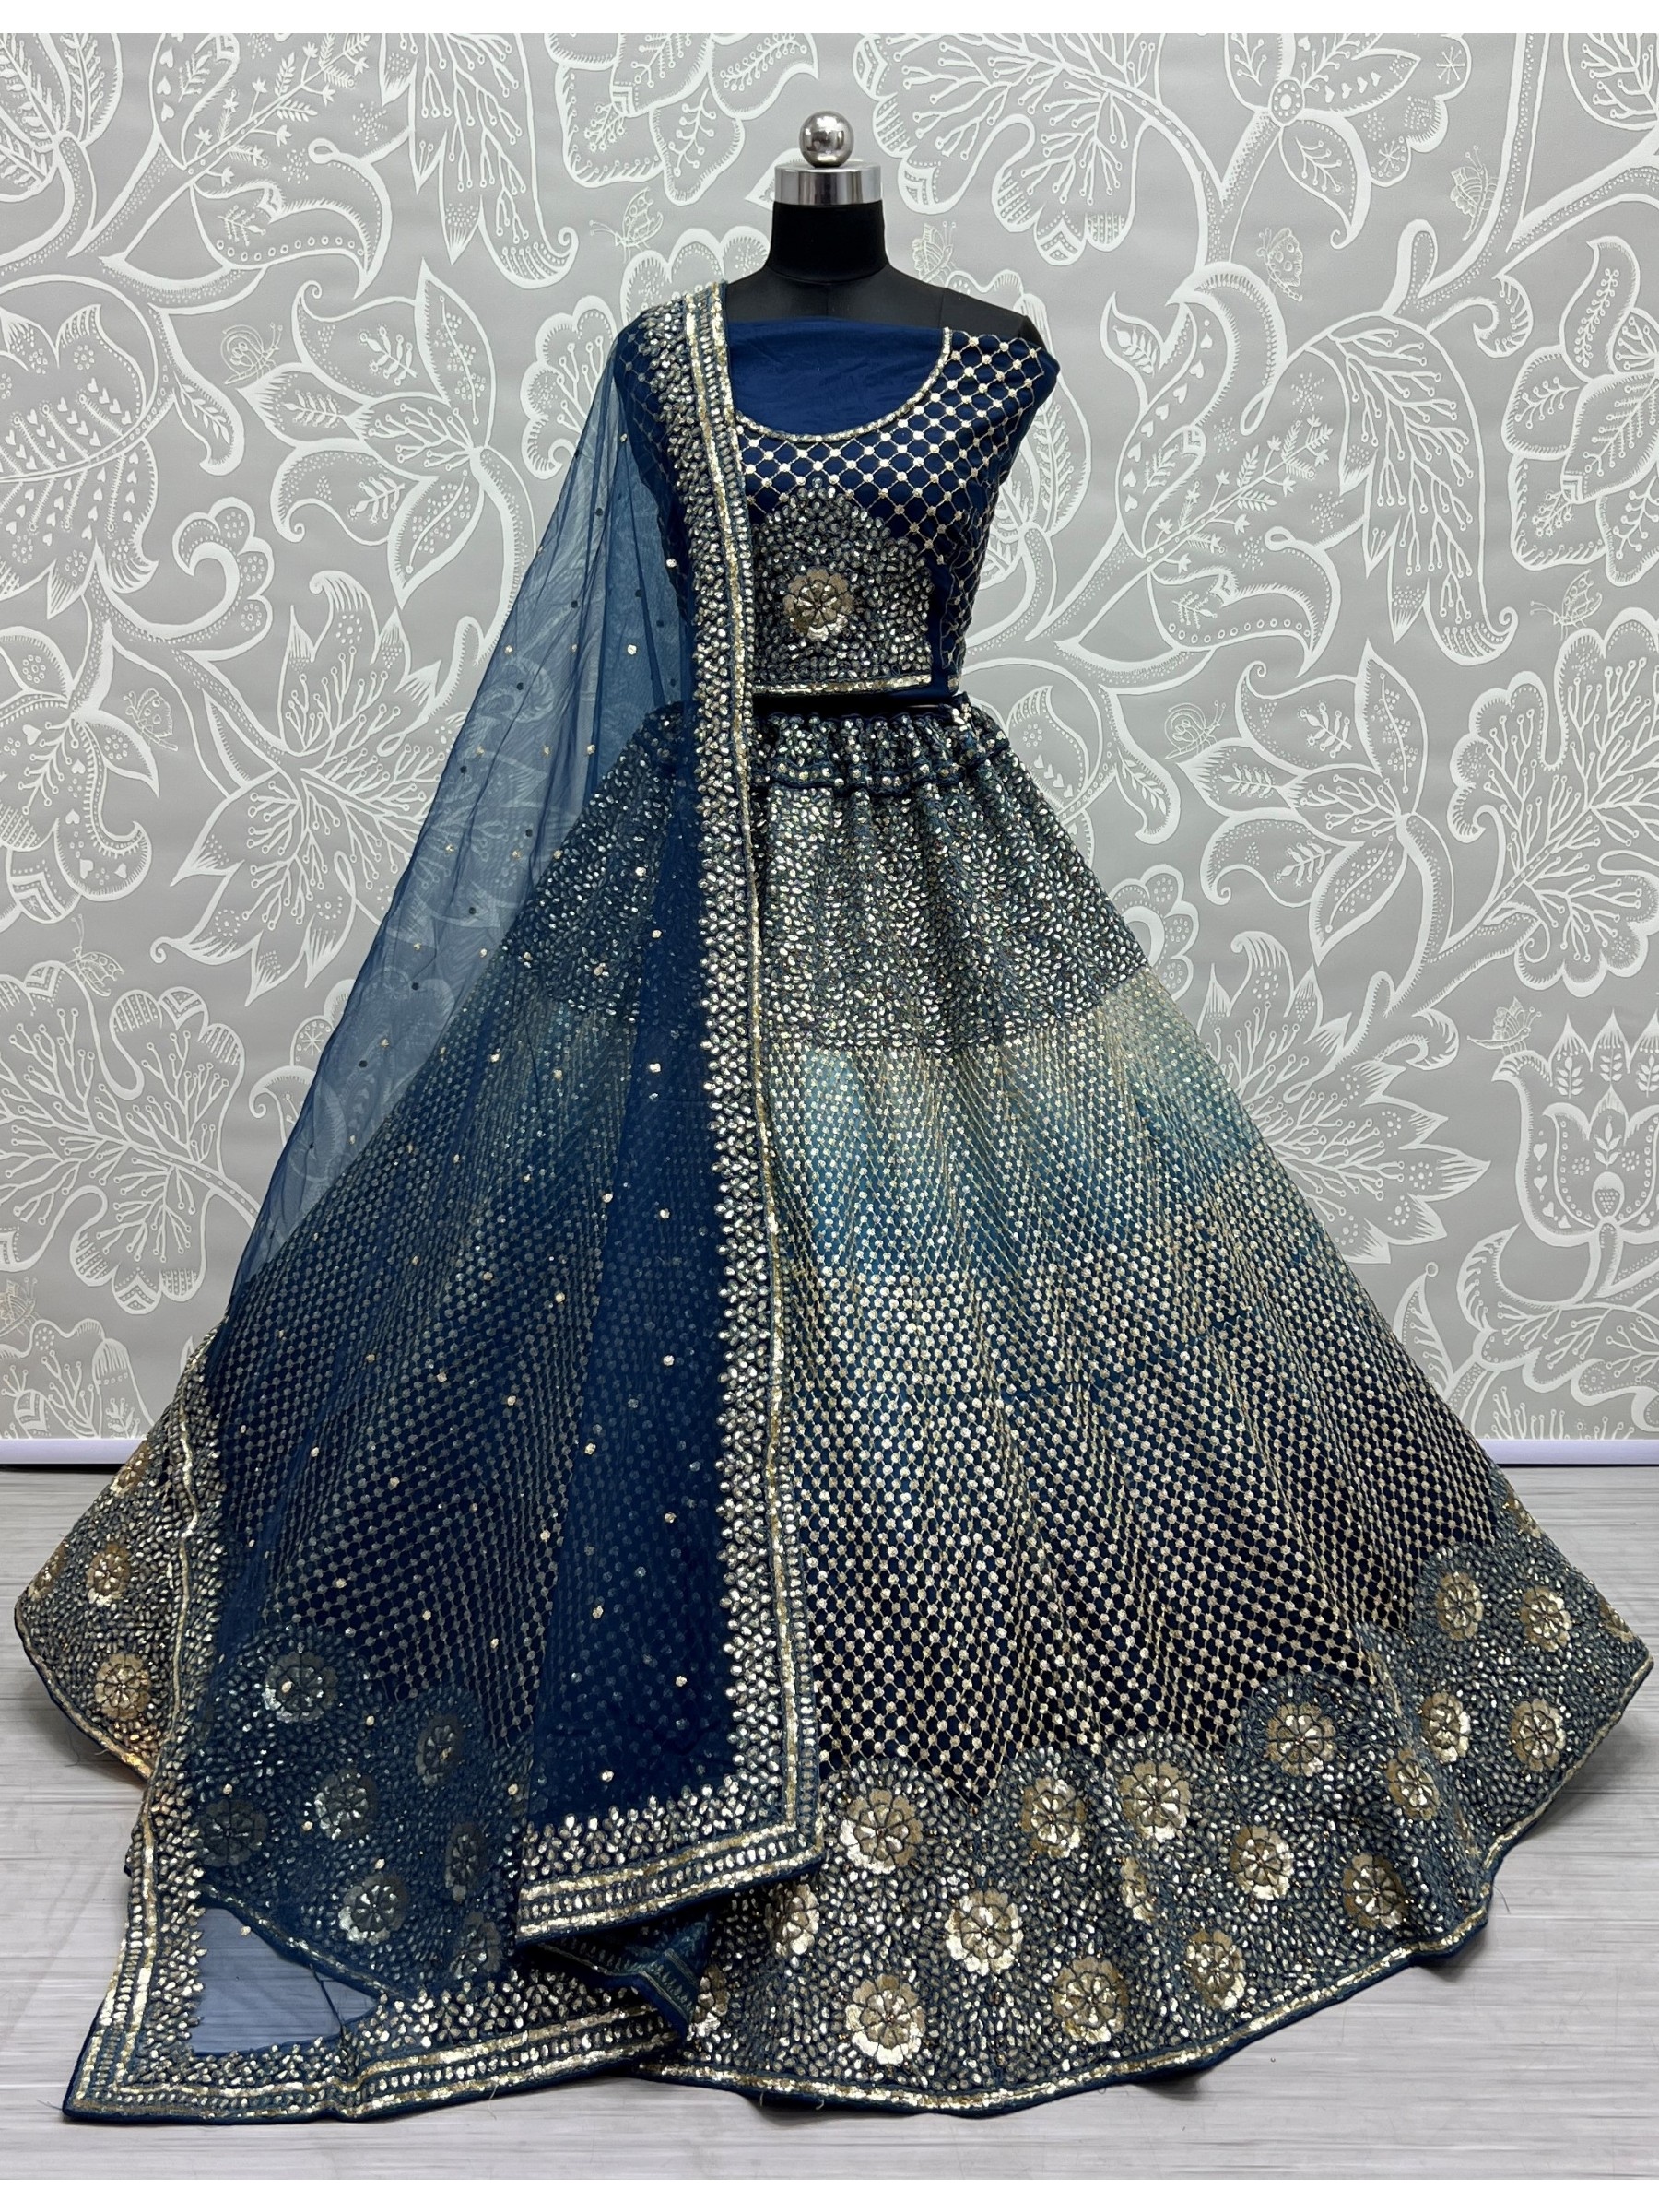 Soft Premium Net  Party Wear Lehenga In Blue Color  With Embroidery Work